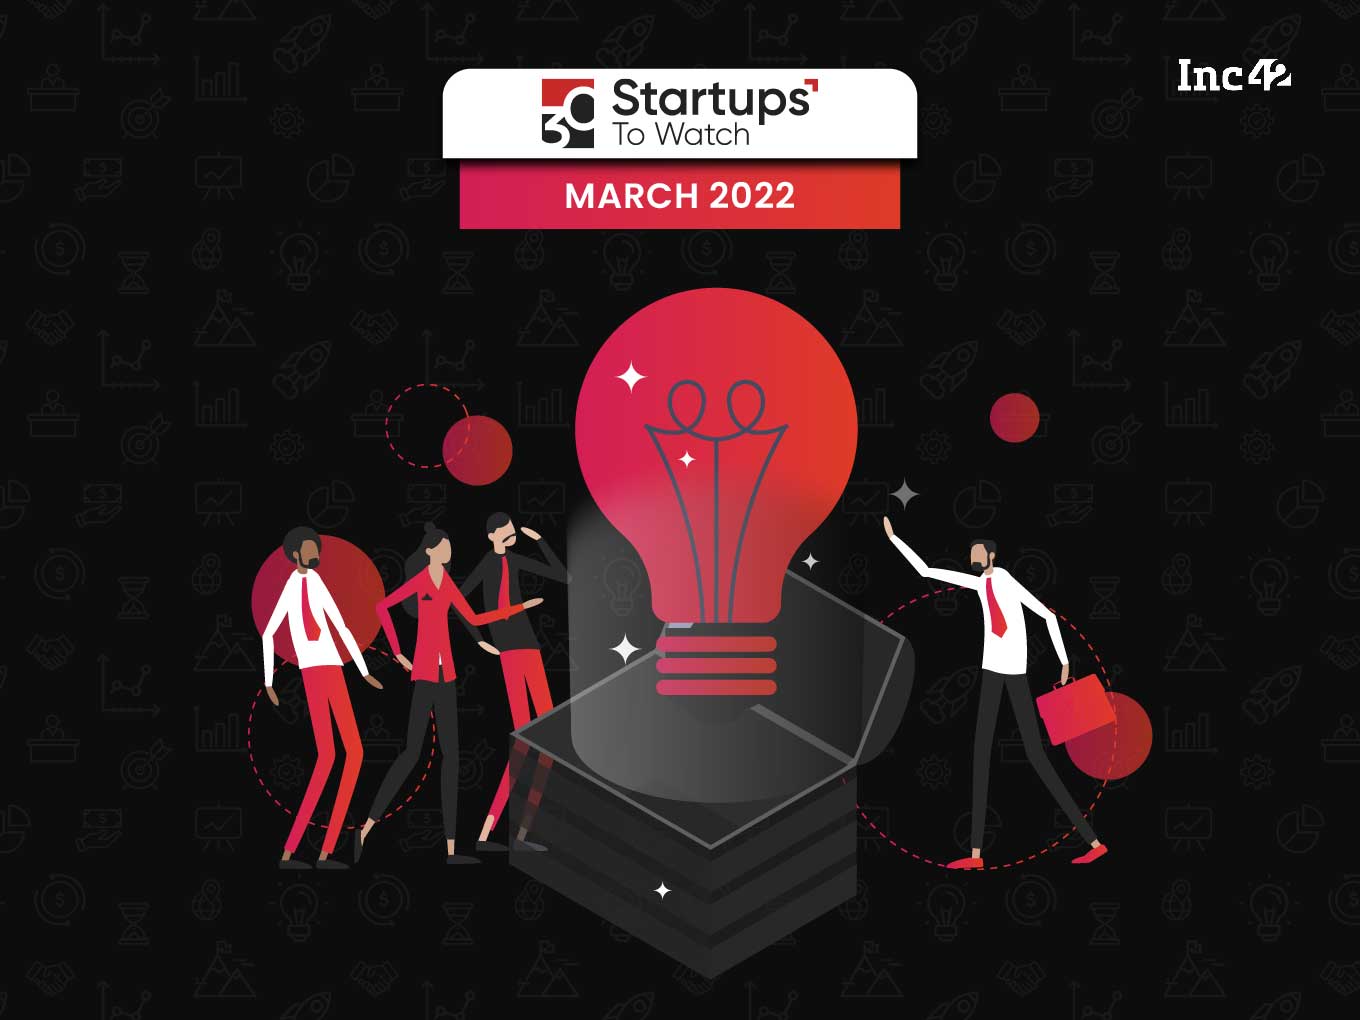 30 Startups To Watch: The Startups That Caught Our Eye In March 2022